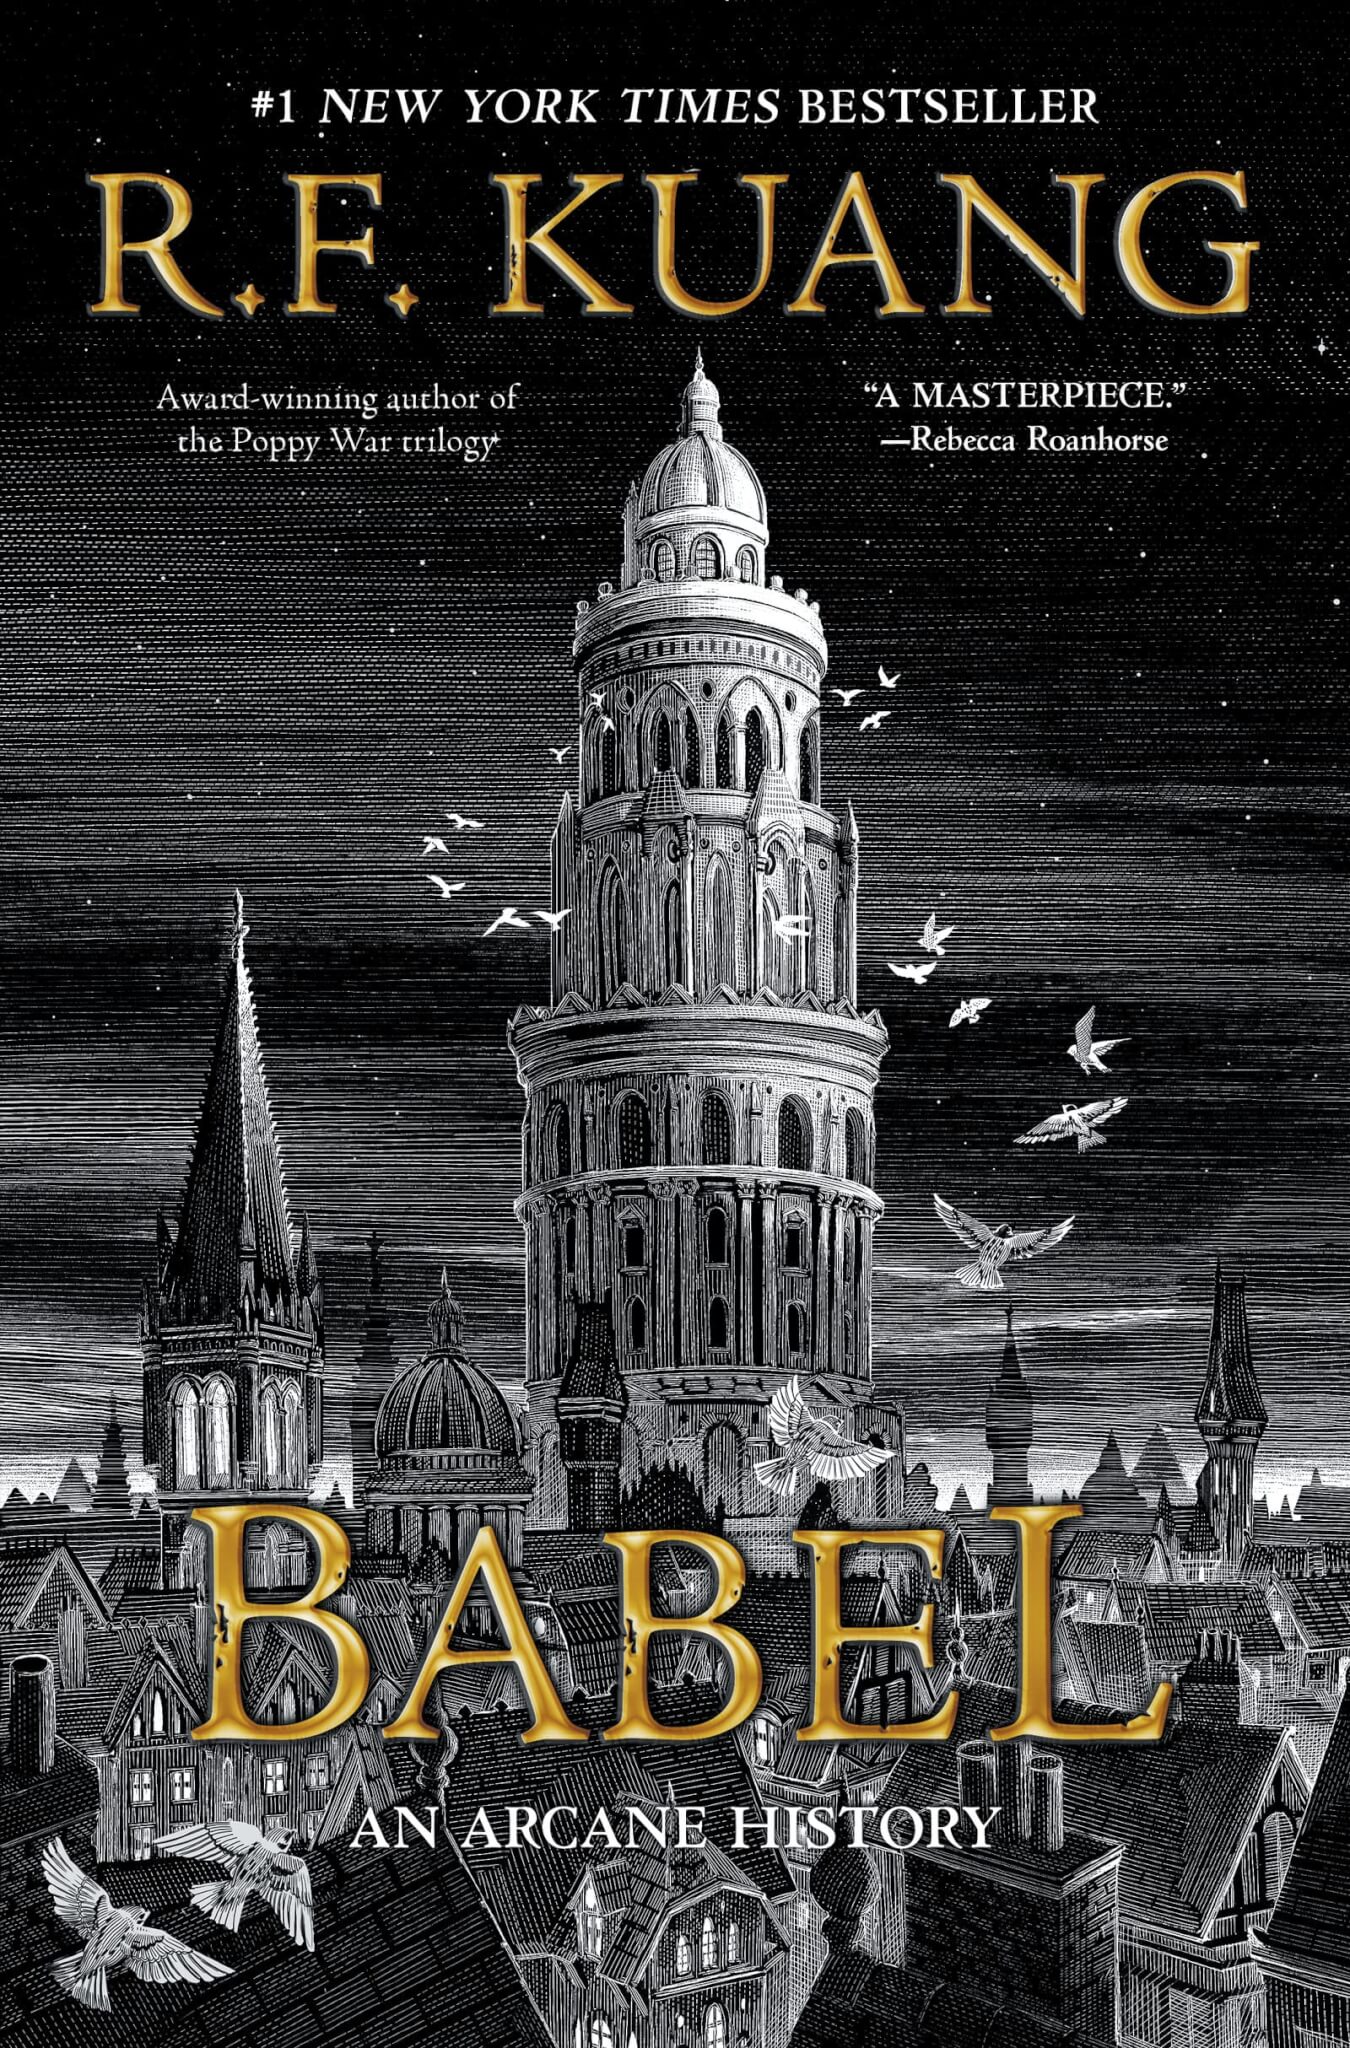 "Babel" by R.F. Kuang